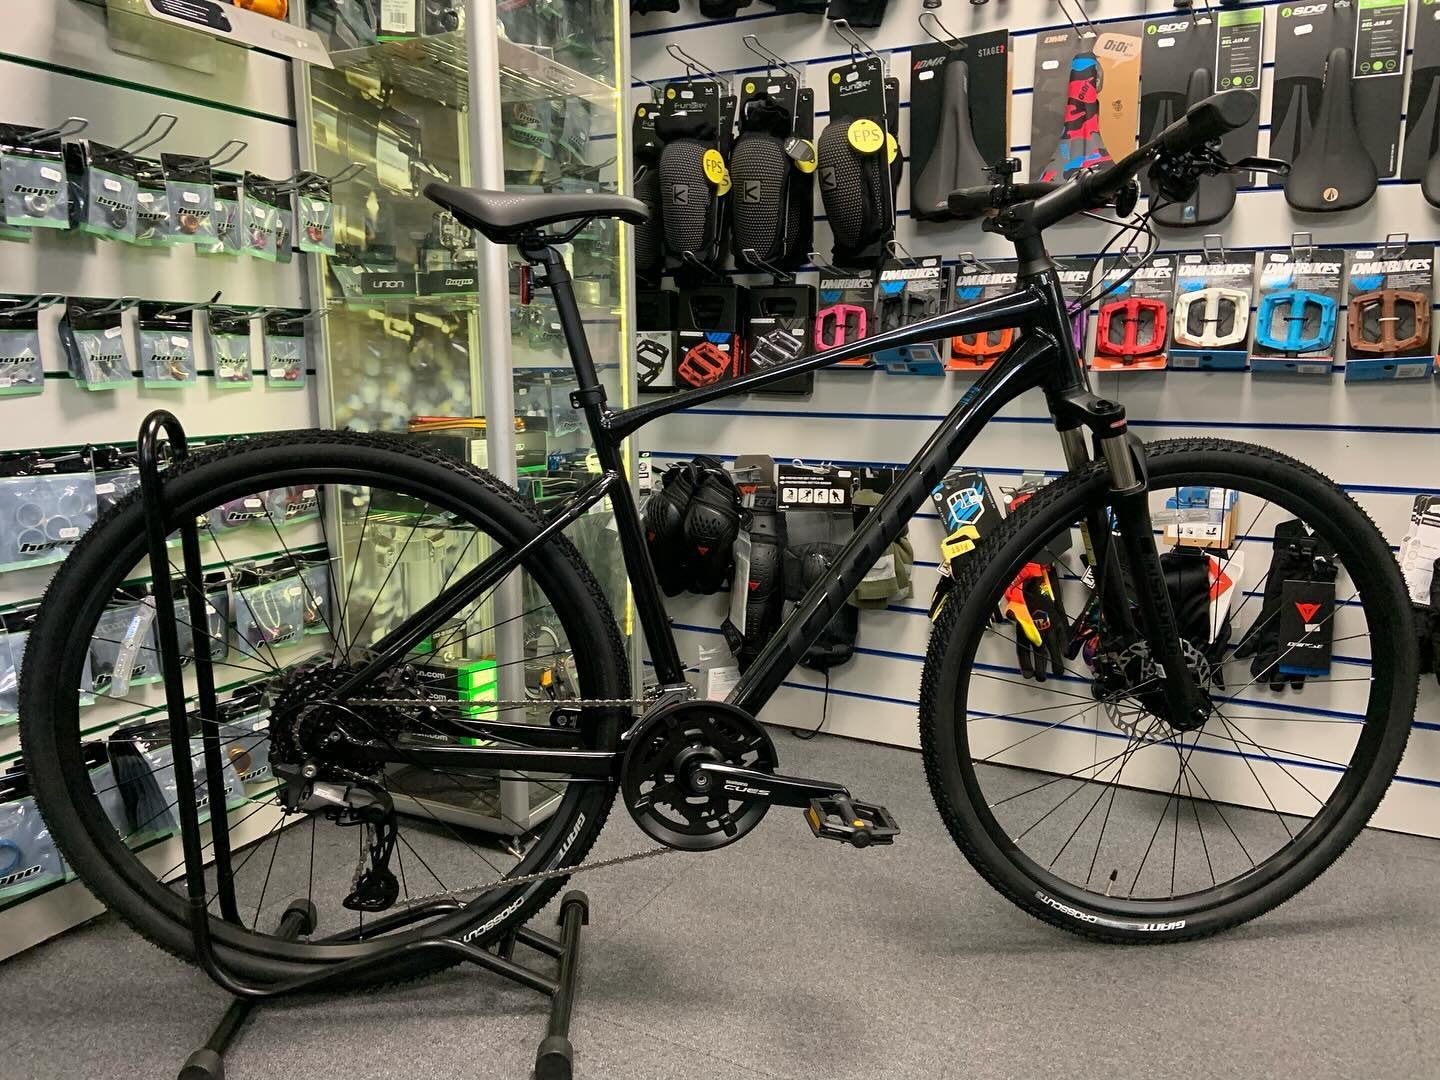 Another fantastic @giantuk #roam #hybridbike getting ready to leave us today. Nice sparkling paint job on this Roam 1. ❤️❤️
#localbikeshop #shoplocal #bikeshop #miltonkeynesbikeshop #miltonkeynes #miltonkeynesbusiness #miltonkeynessmallbusiness #gian